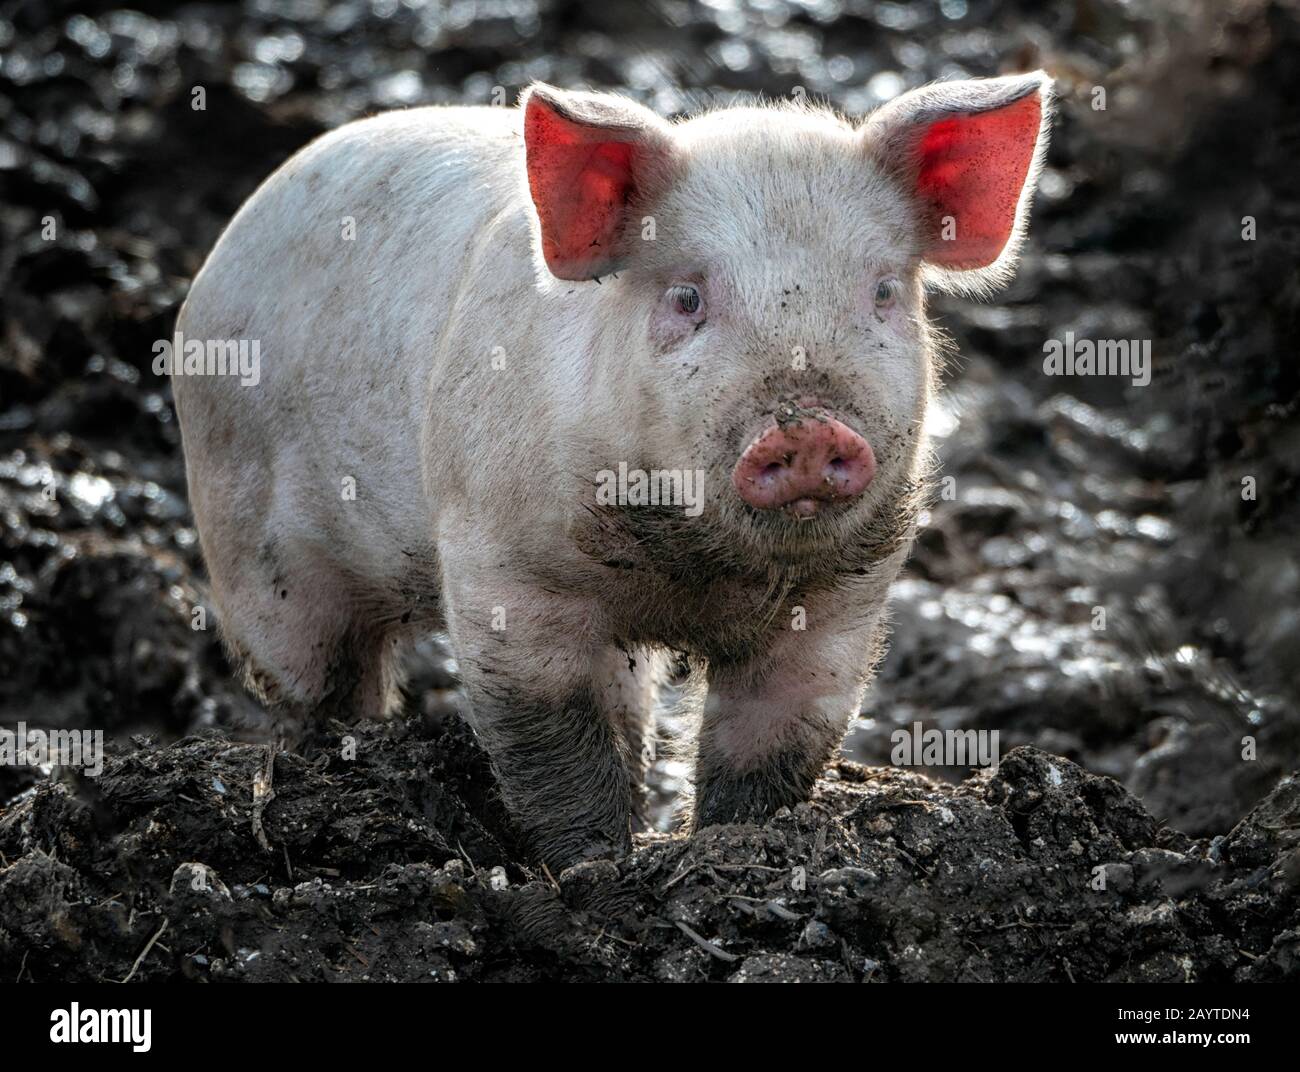 Cute, pink piglet wallowing in mud: domestic pigs, which are omnivores, are highly social and intelligent mammals similar, biologically, to humans. Stock Photo